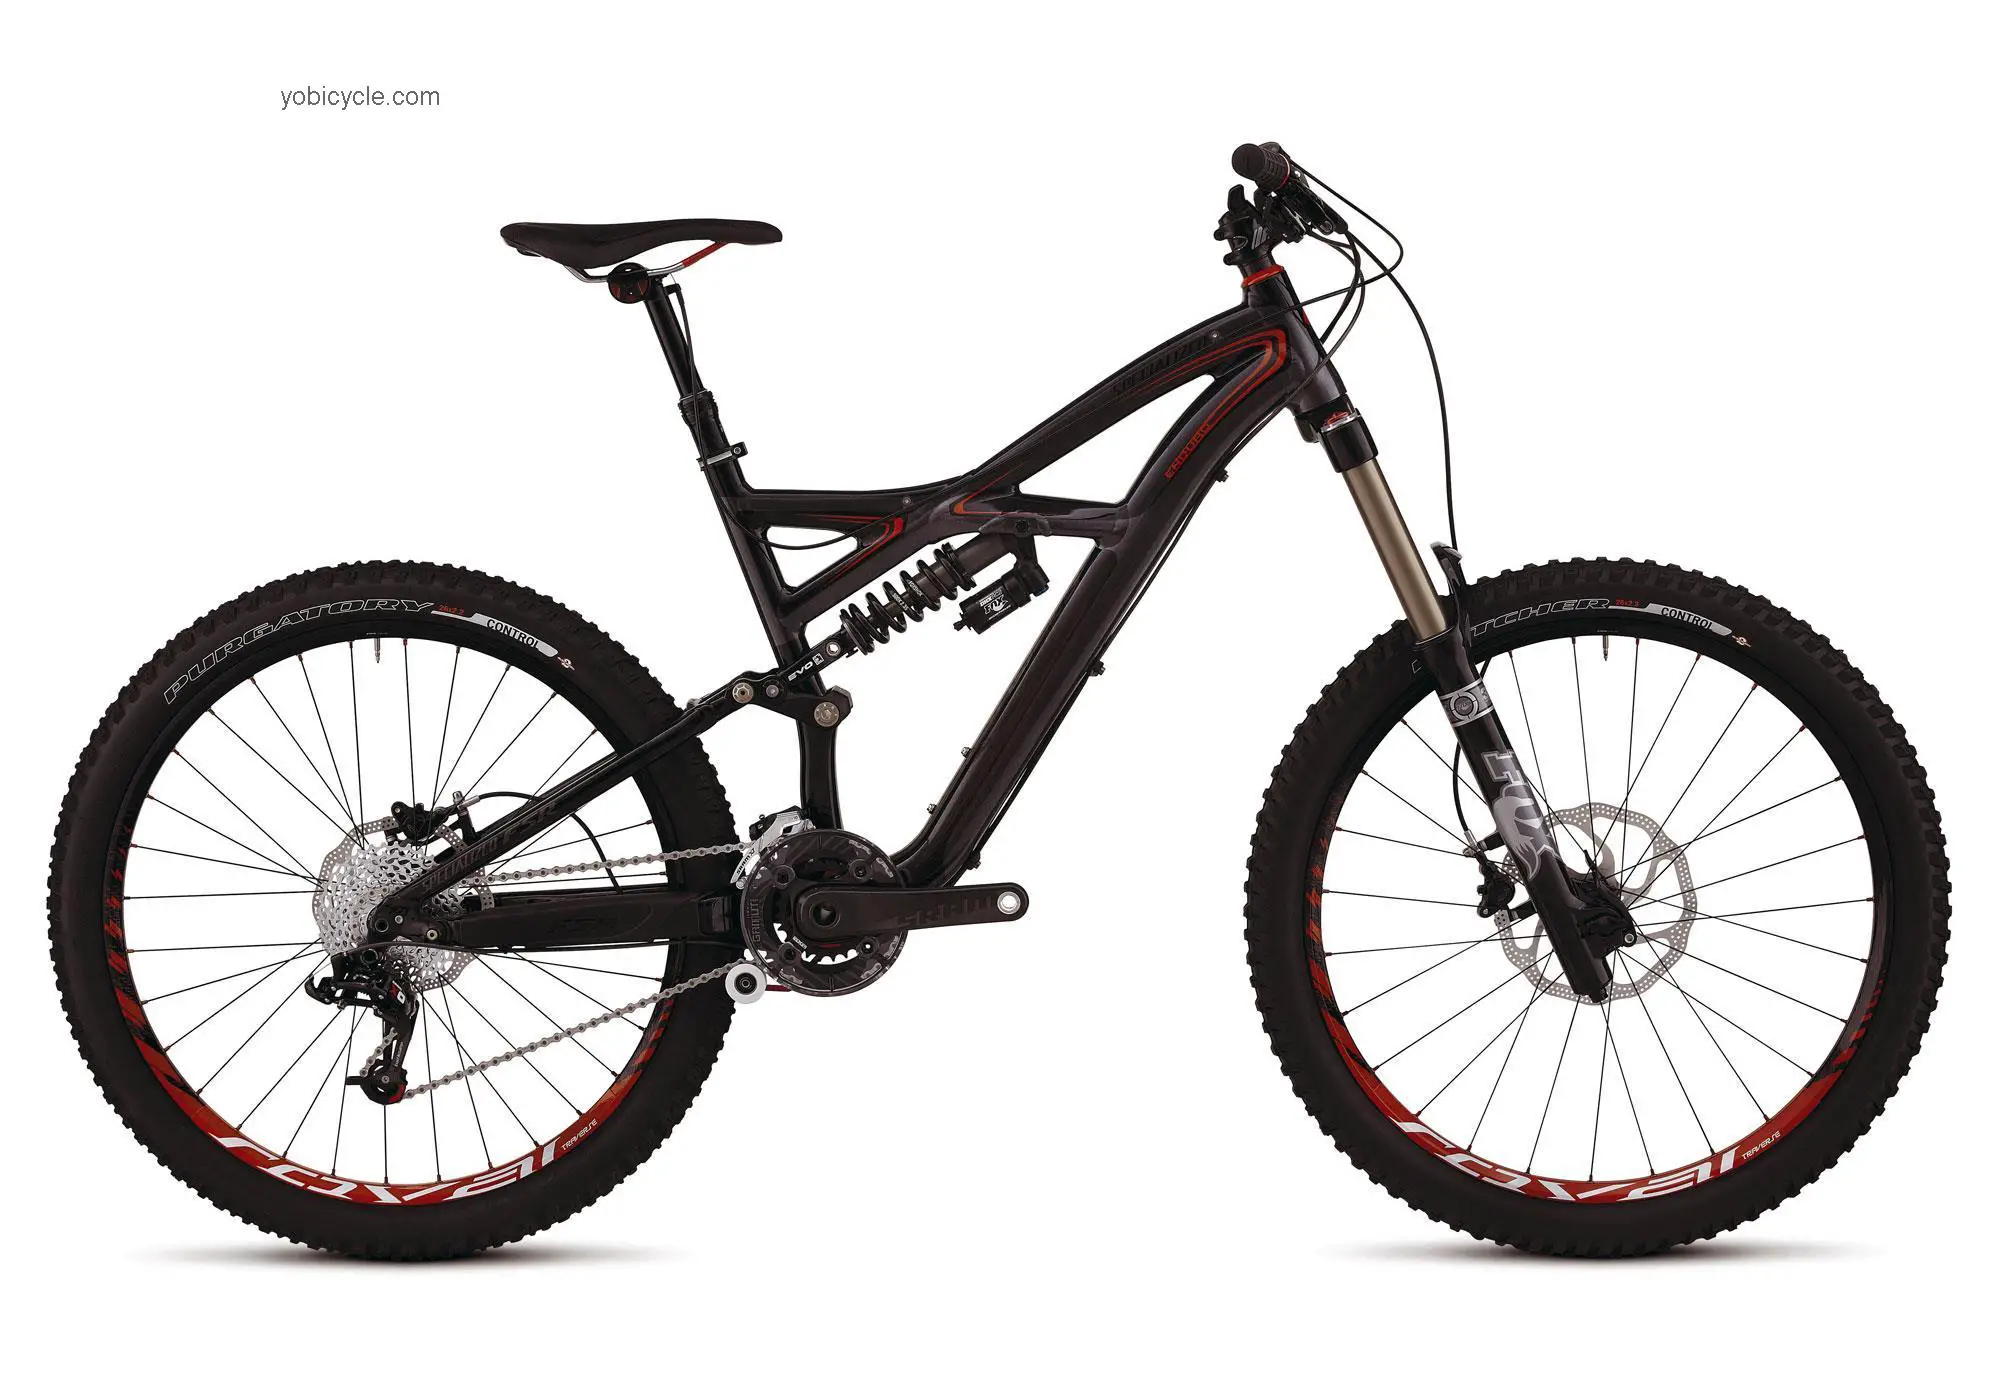 Specialized Enduro FSR Expert Evo 2012 comparison online with competitors